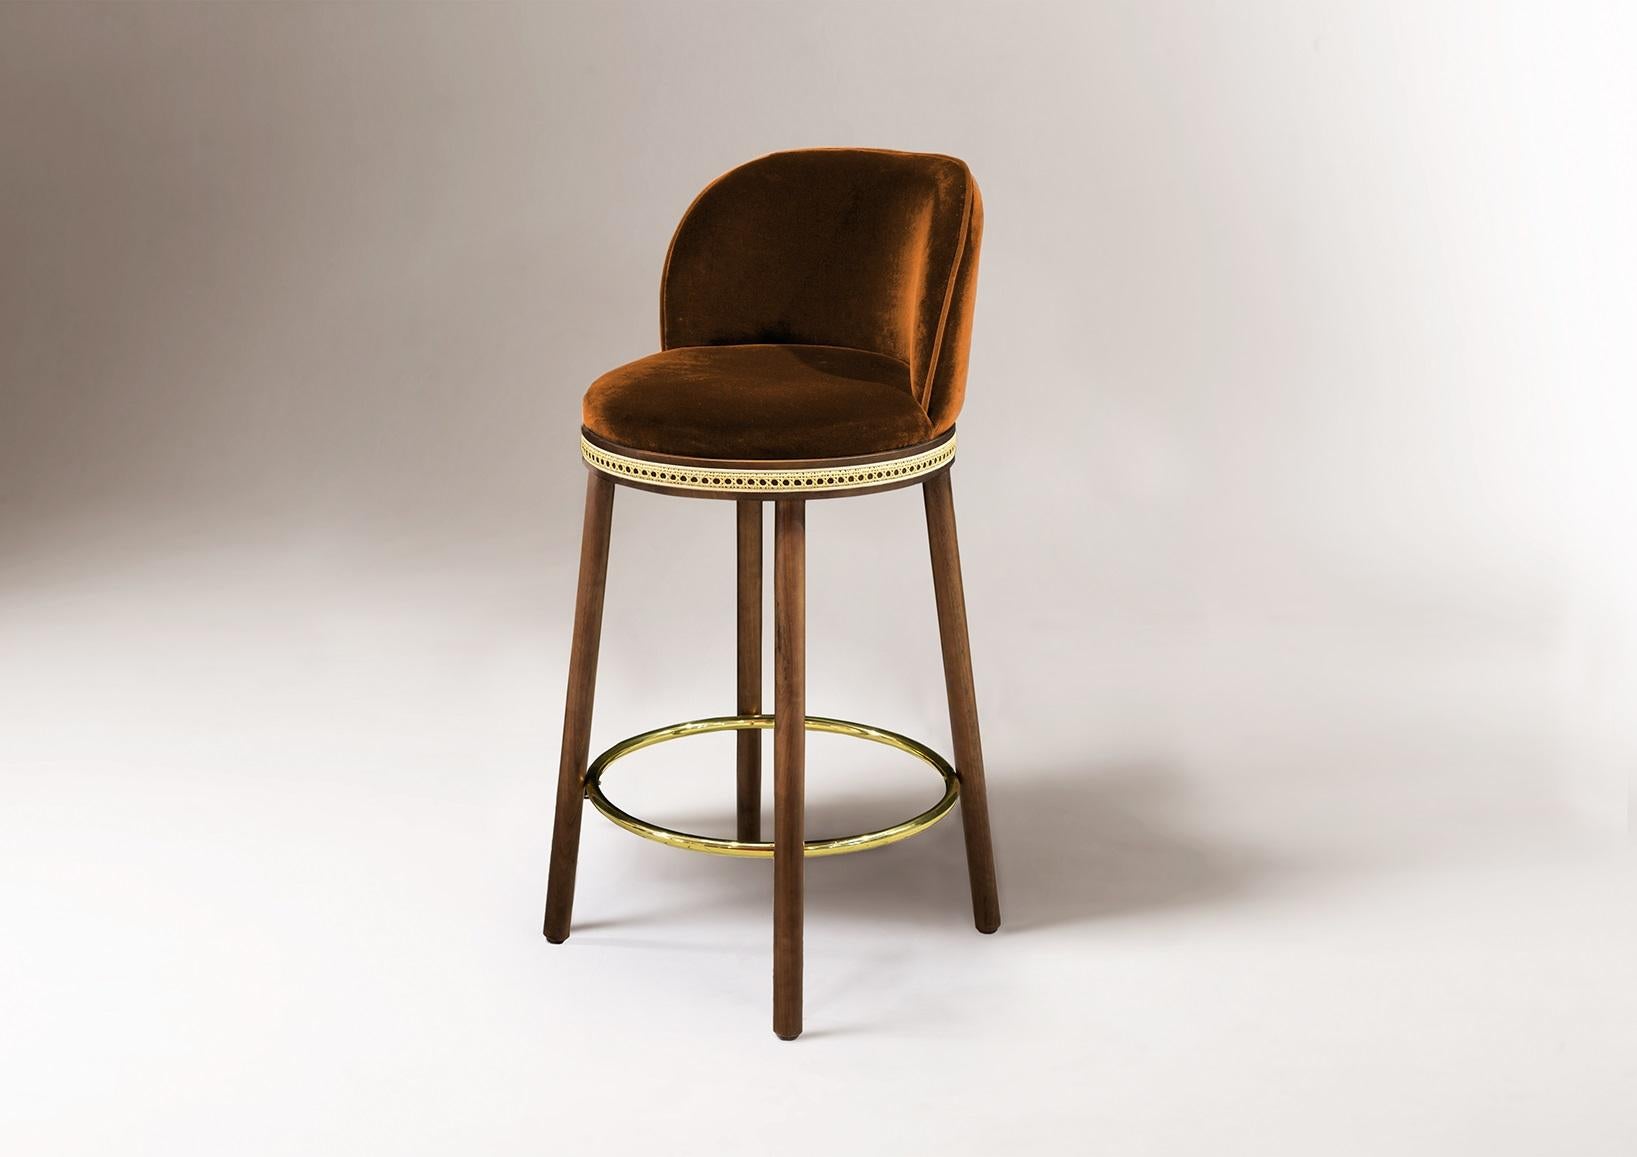 DOOQ Mid-Century Modern Counter Chair Alma with Brown Velvet, Walnut and Brass

In a piece that combines classic and modern aesthetics we can find a certain harmonic gracefulness paired with an intimate voluptuousness that can embrace you and